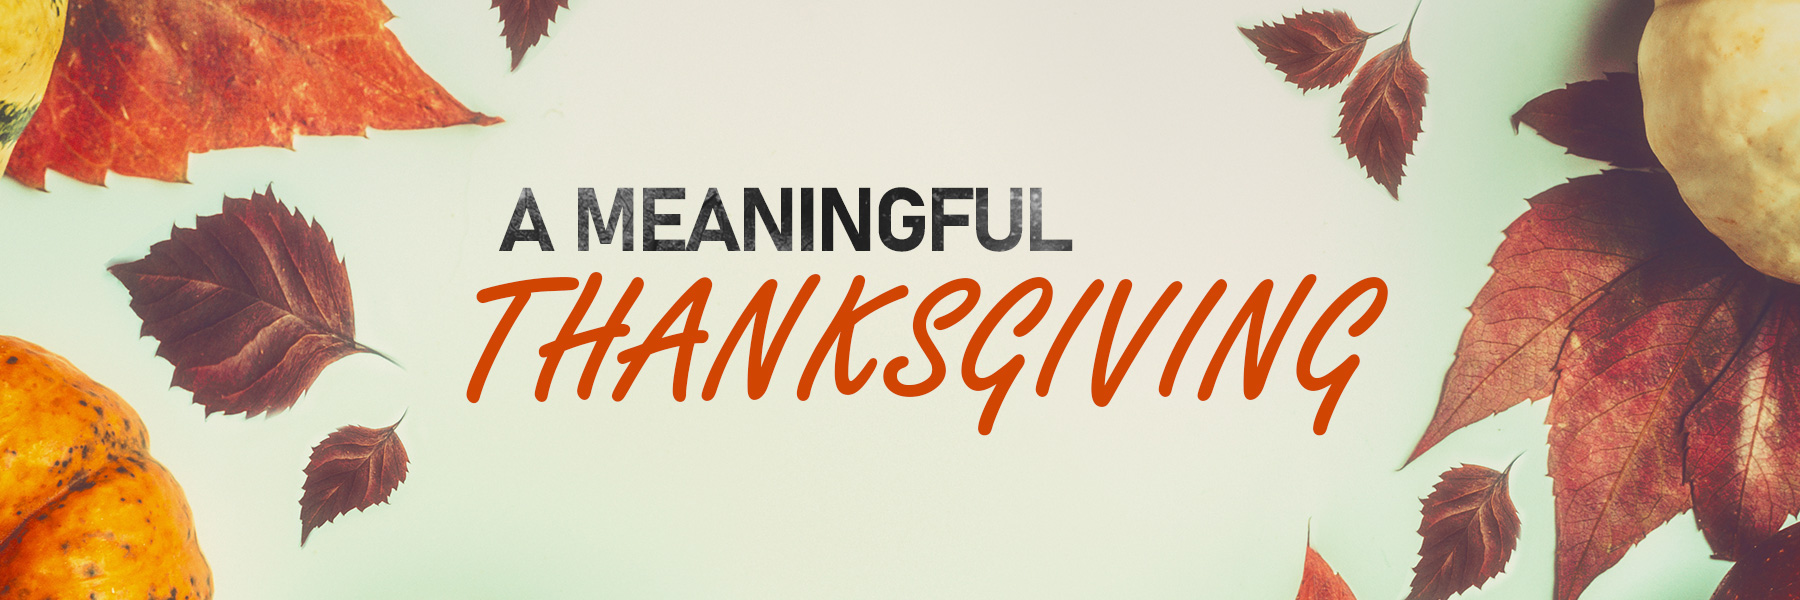 A Meaningful Thanksgiving